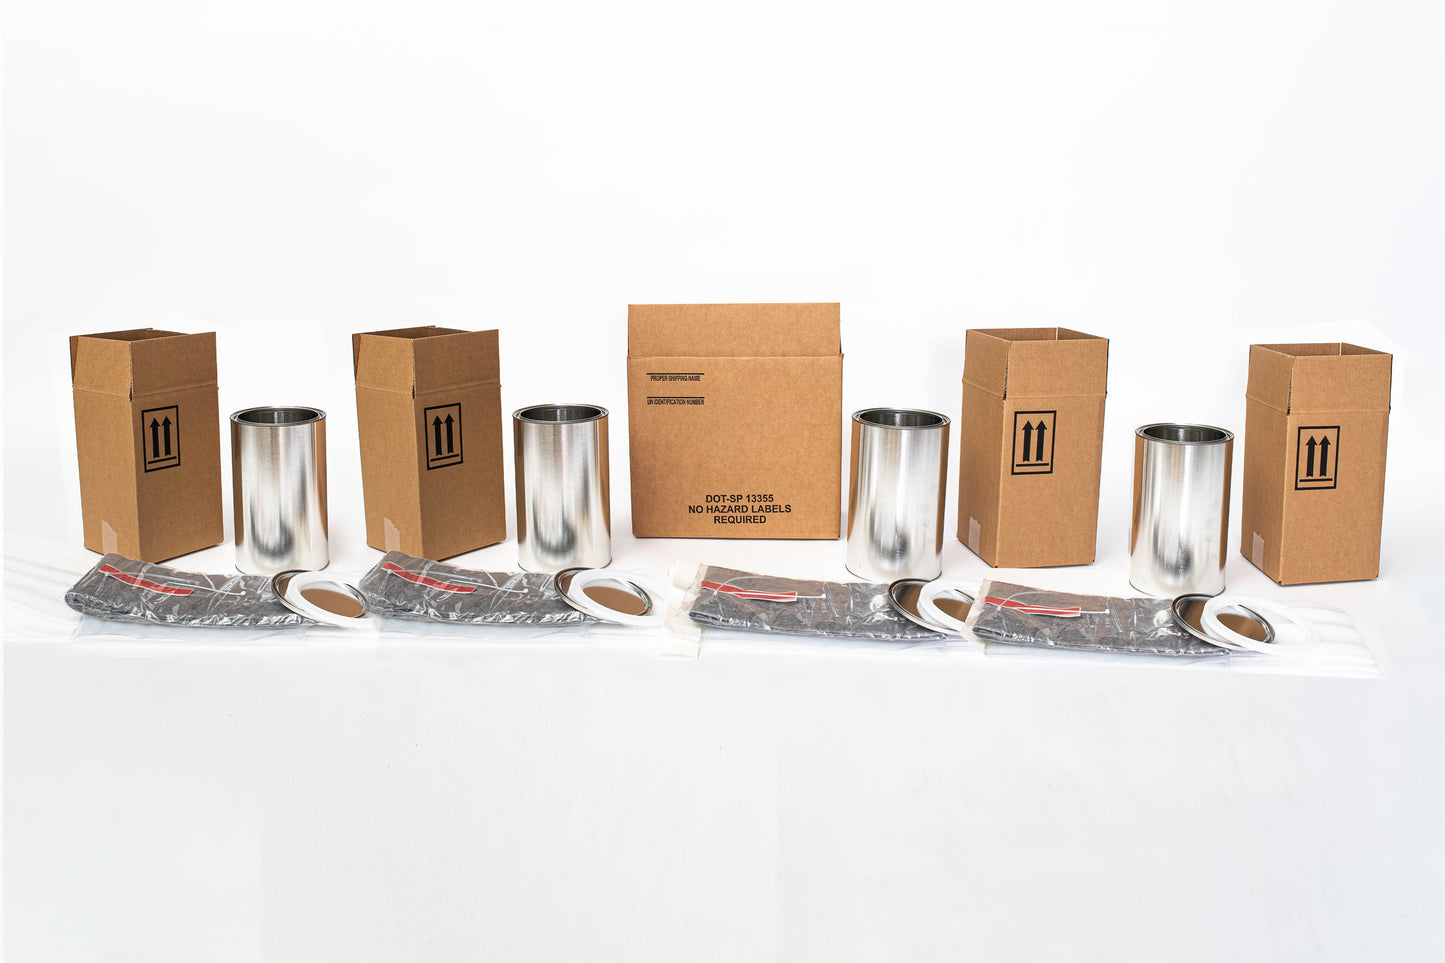 UN4GV 4-in 1 Liter/32 oz (or less) Special Permit Packaging Kit